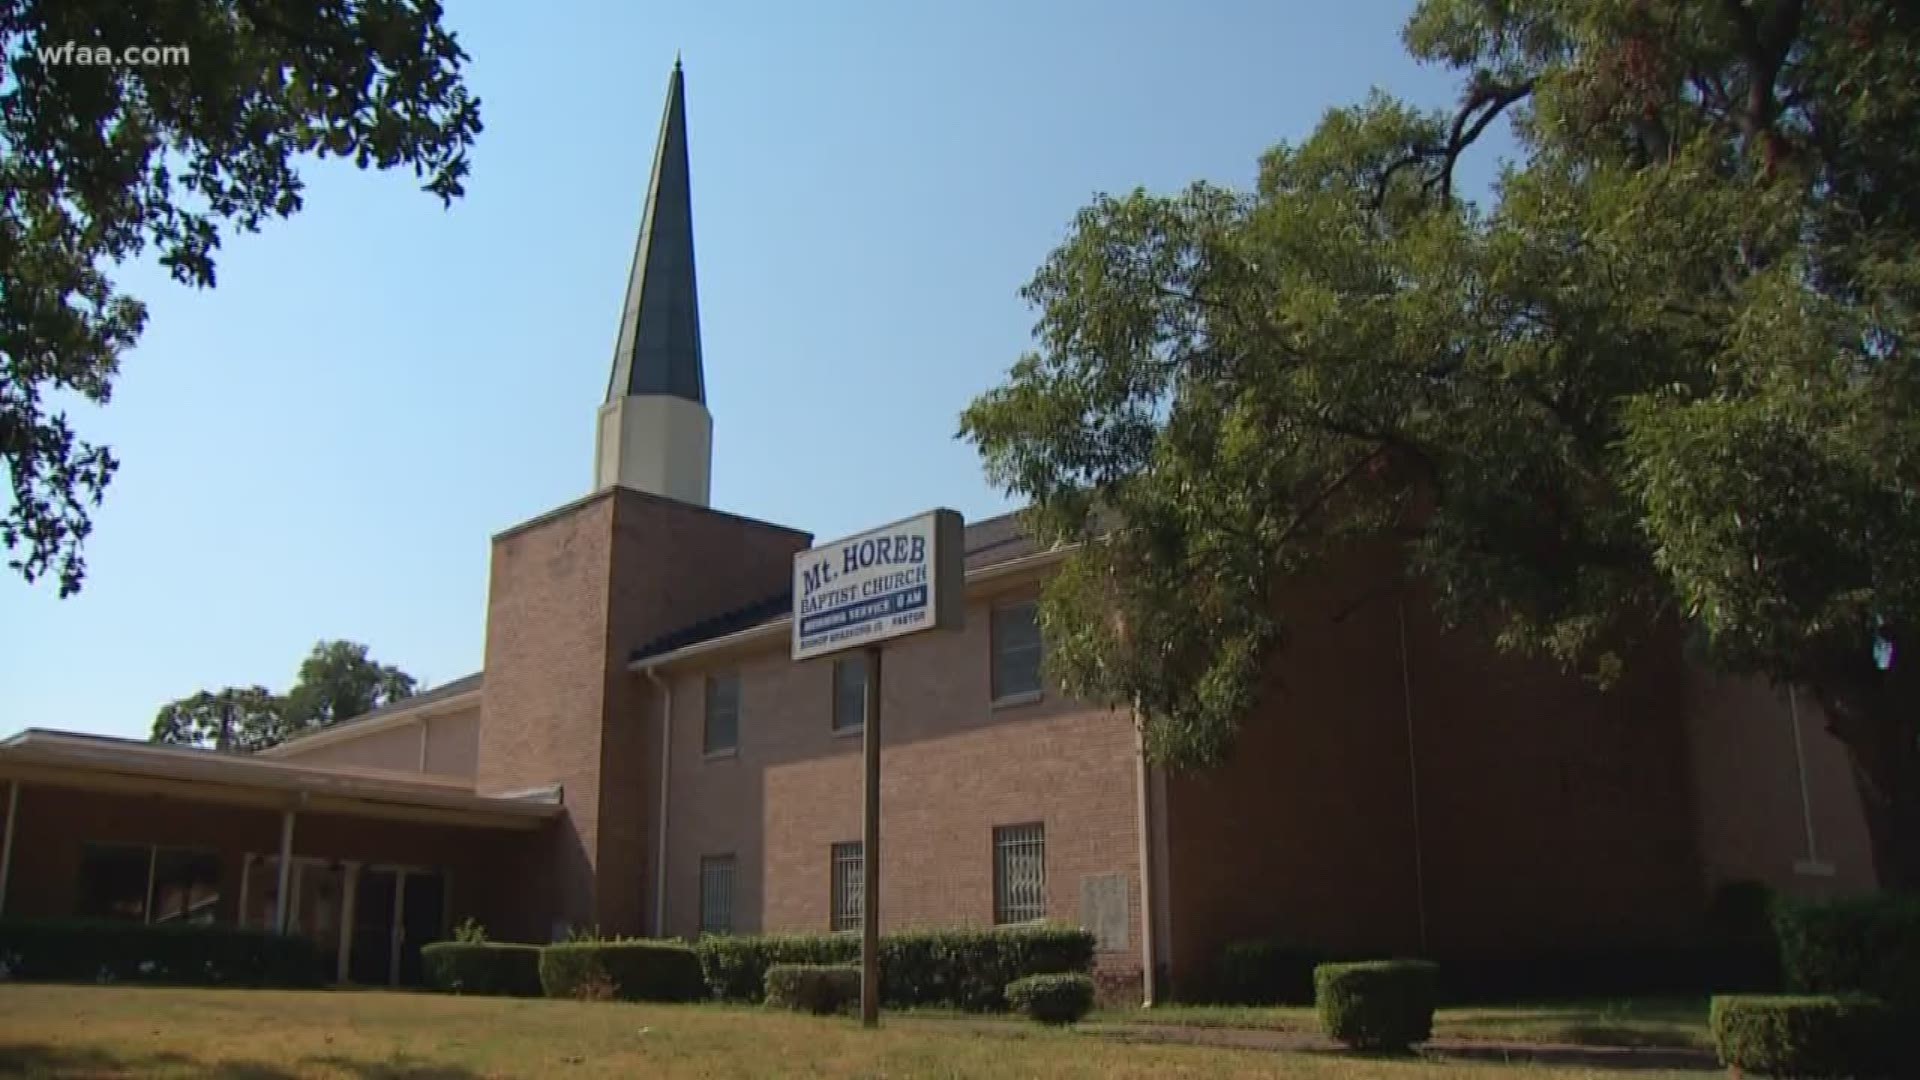 Surveillance video shows burglars stealing air conditioner condensers from Mt. Horeb Baptist Church in South Dallas.